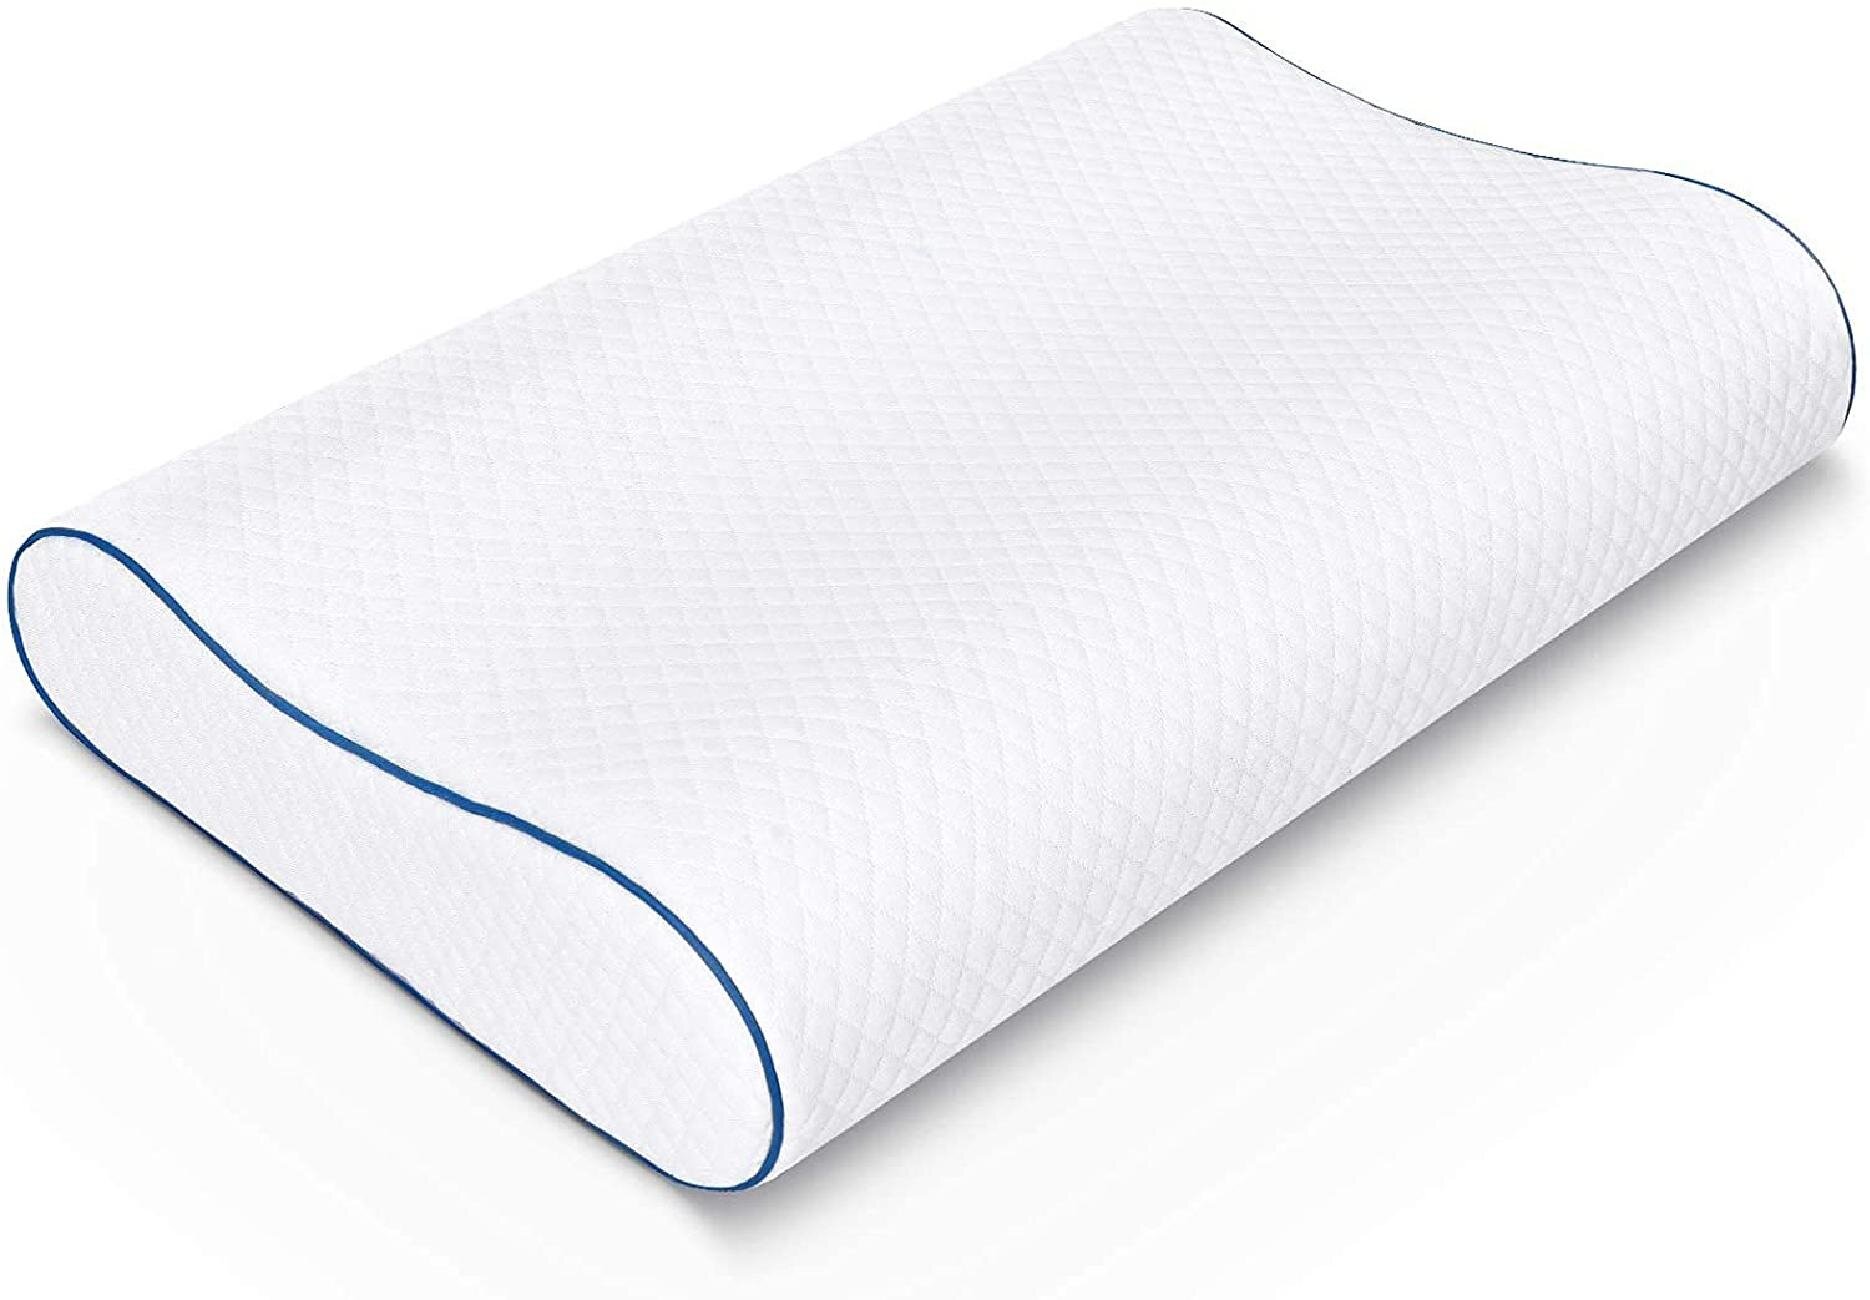 Memory Foam Sleep Pillow Contour Cervical Orthopedic Neck Support Breath Pillows 